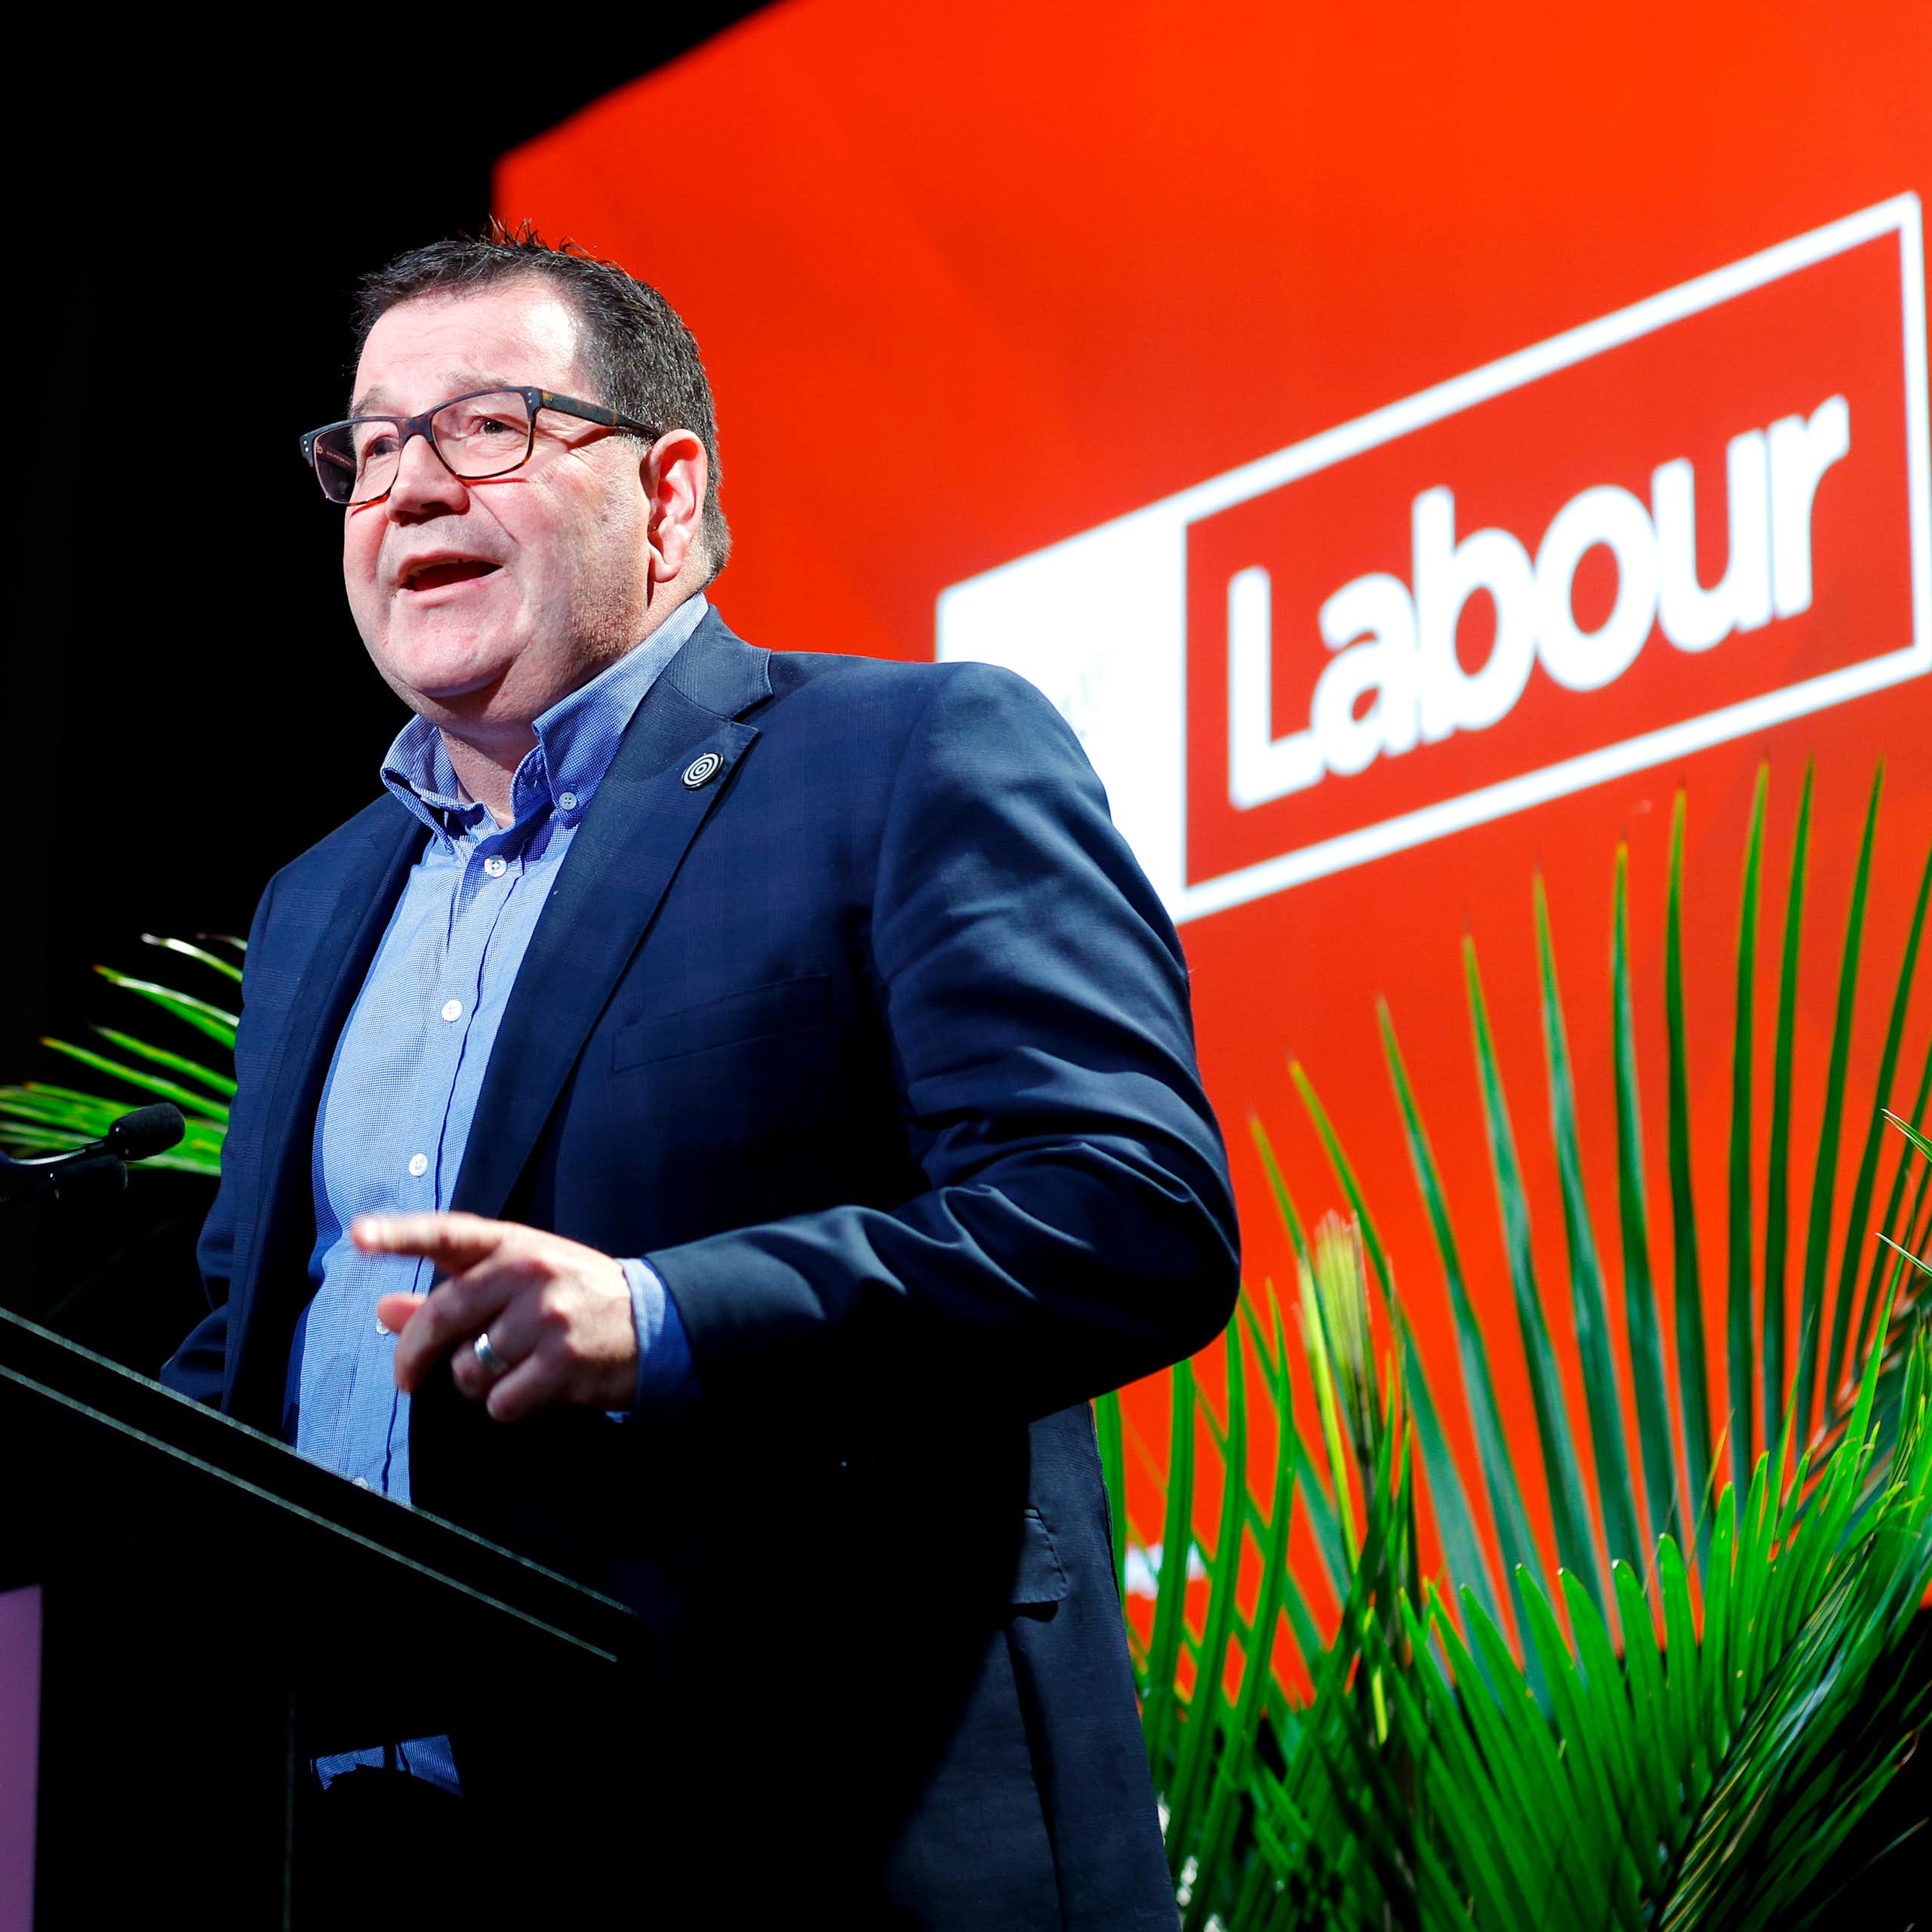 Gratn Robertson speaking in front of a Labour sign